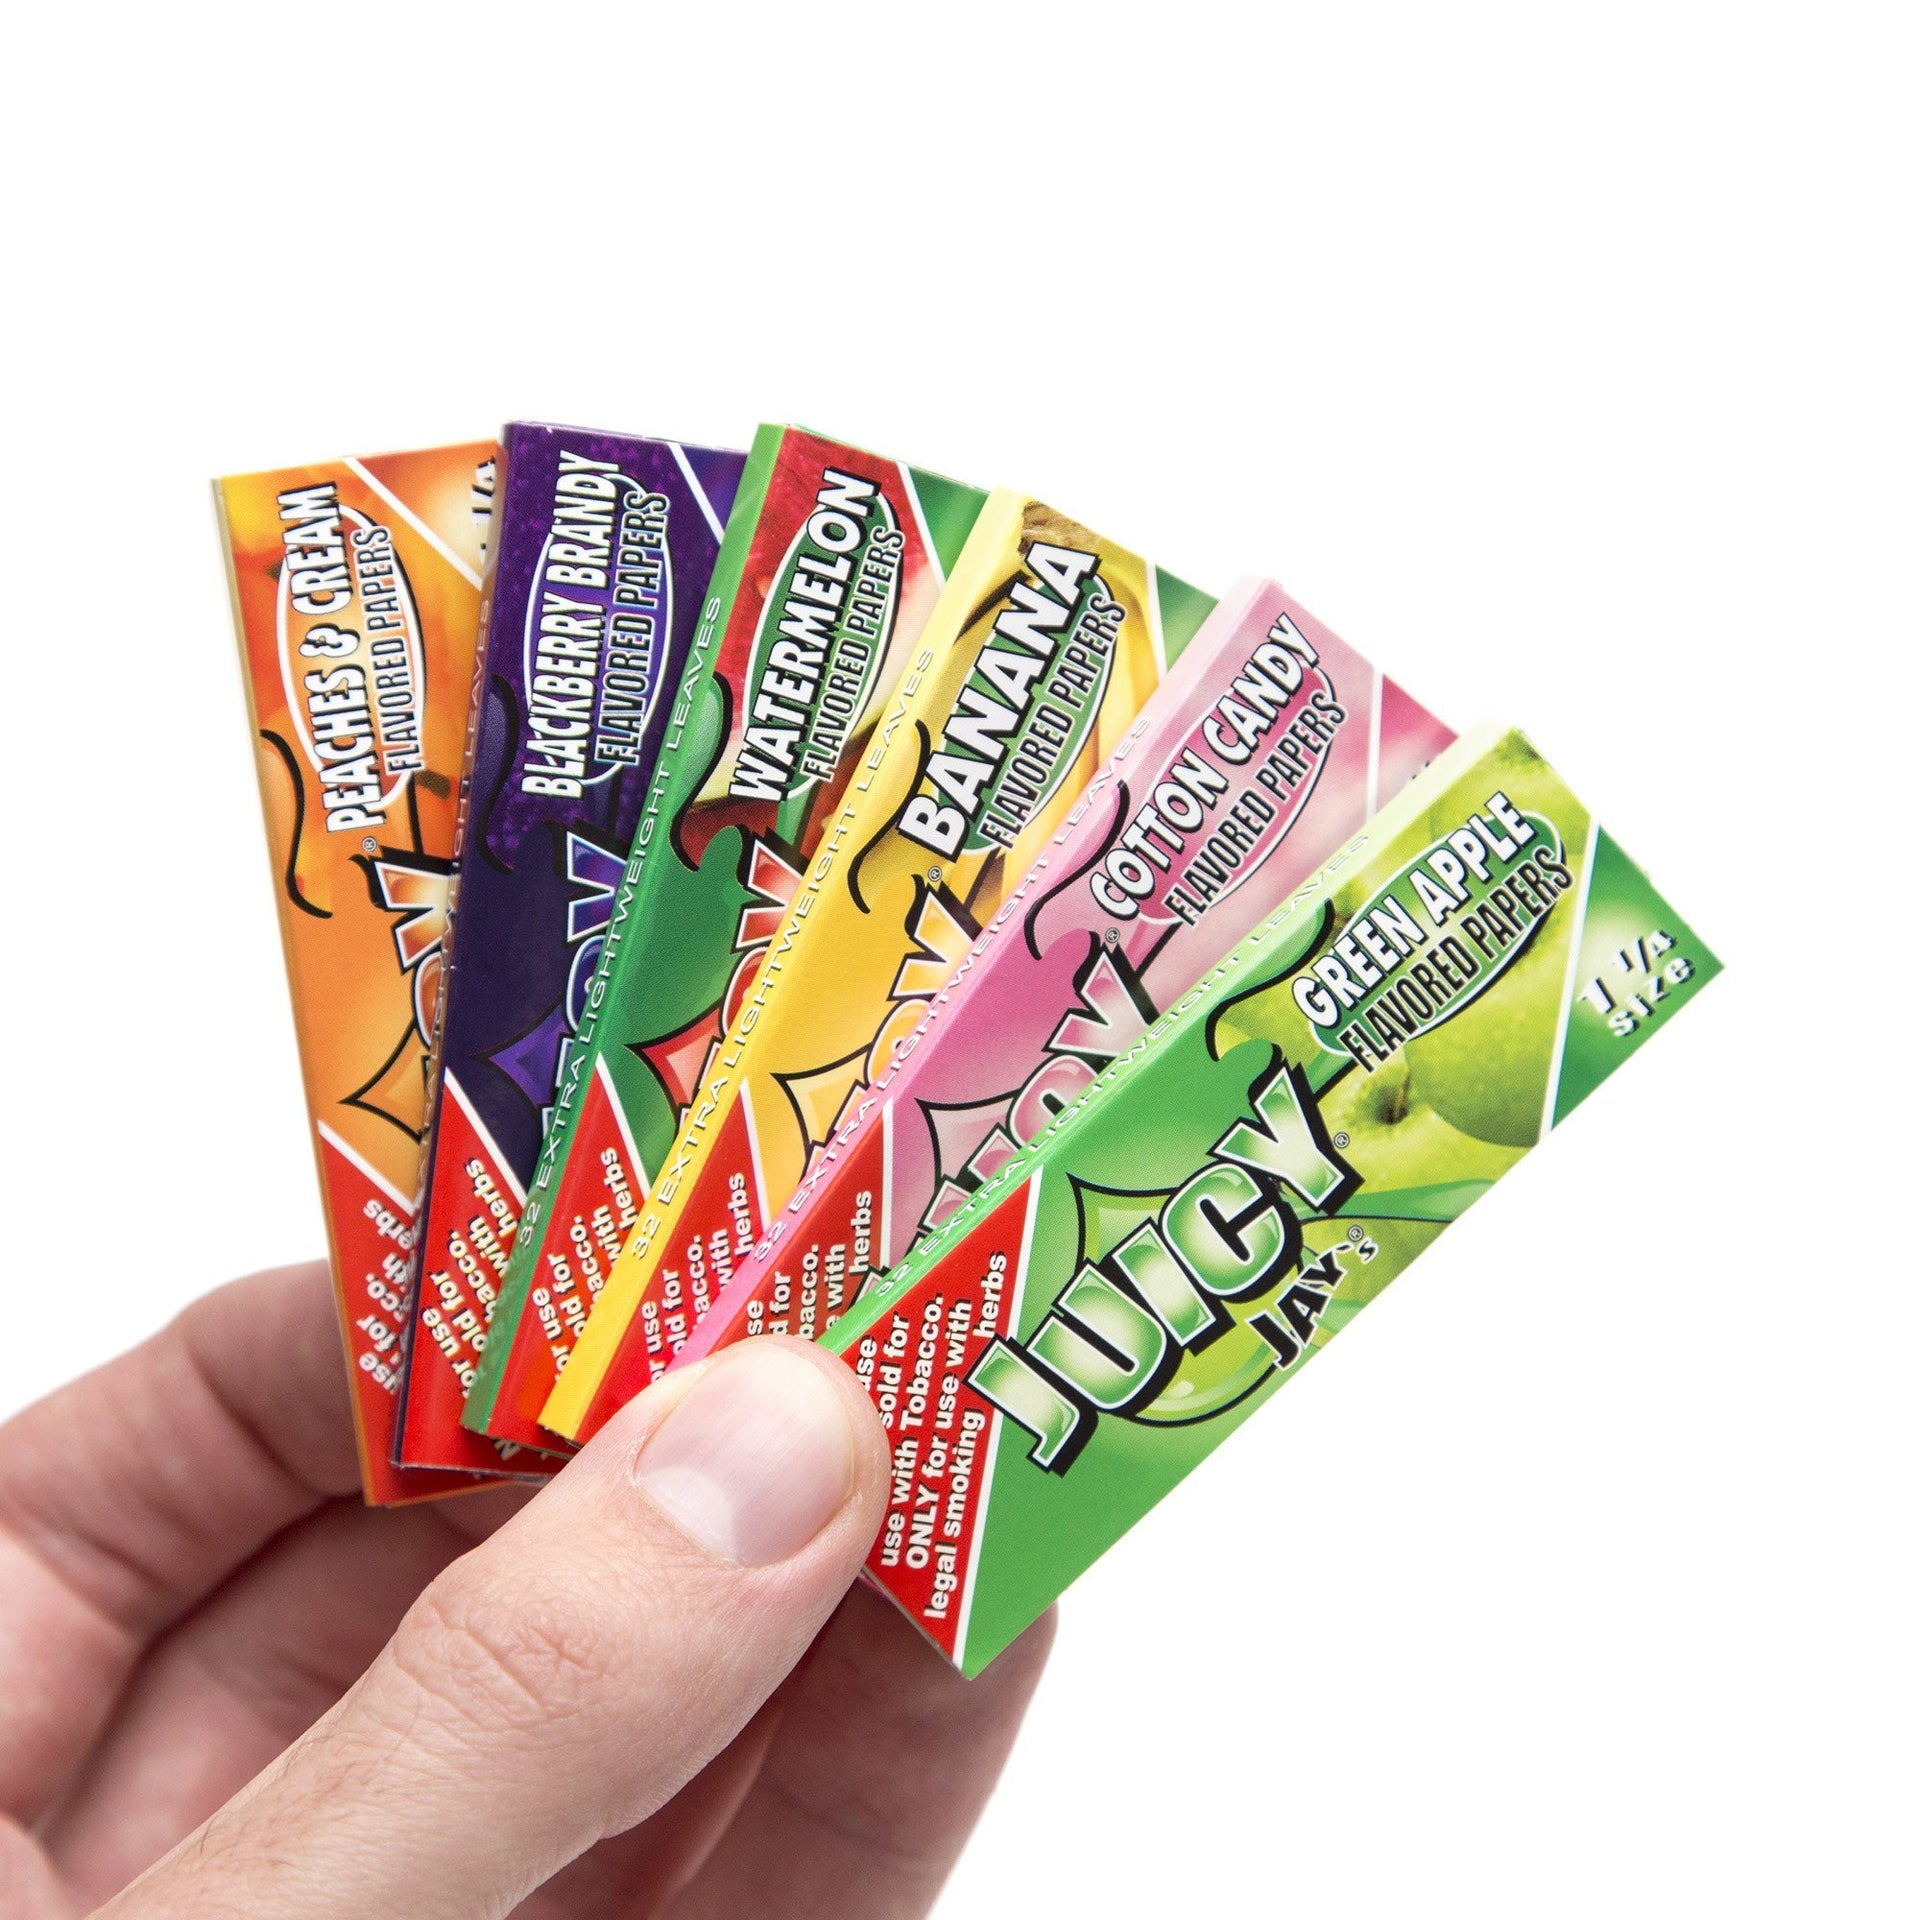 Juicy Jay's 1 1/4in Flavored Papers - Cotton Candy - 420 Science - The most trusted online smoke shop.